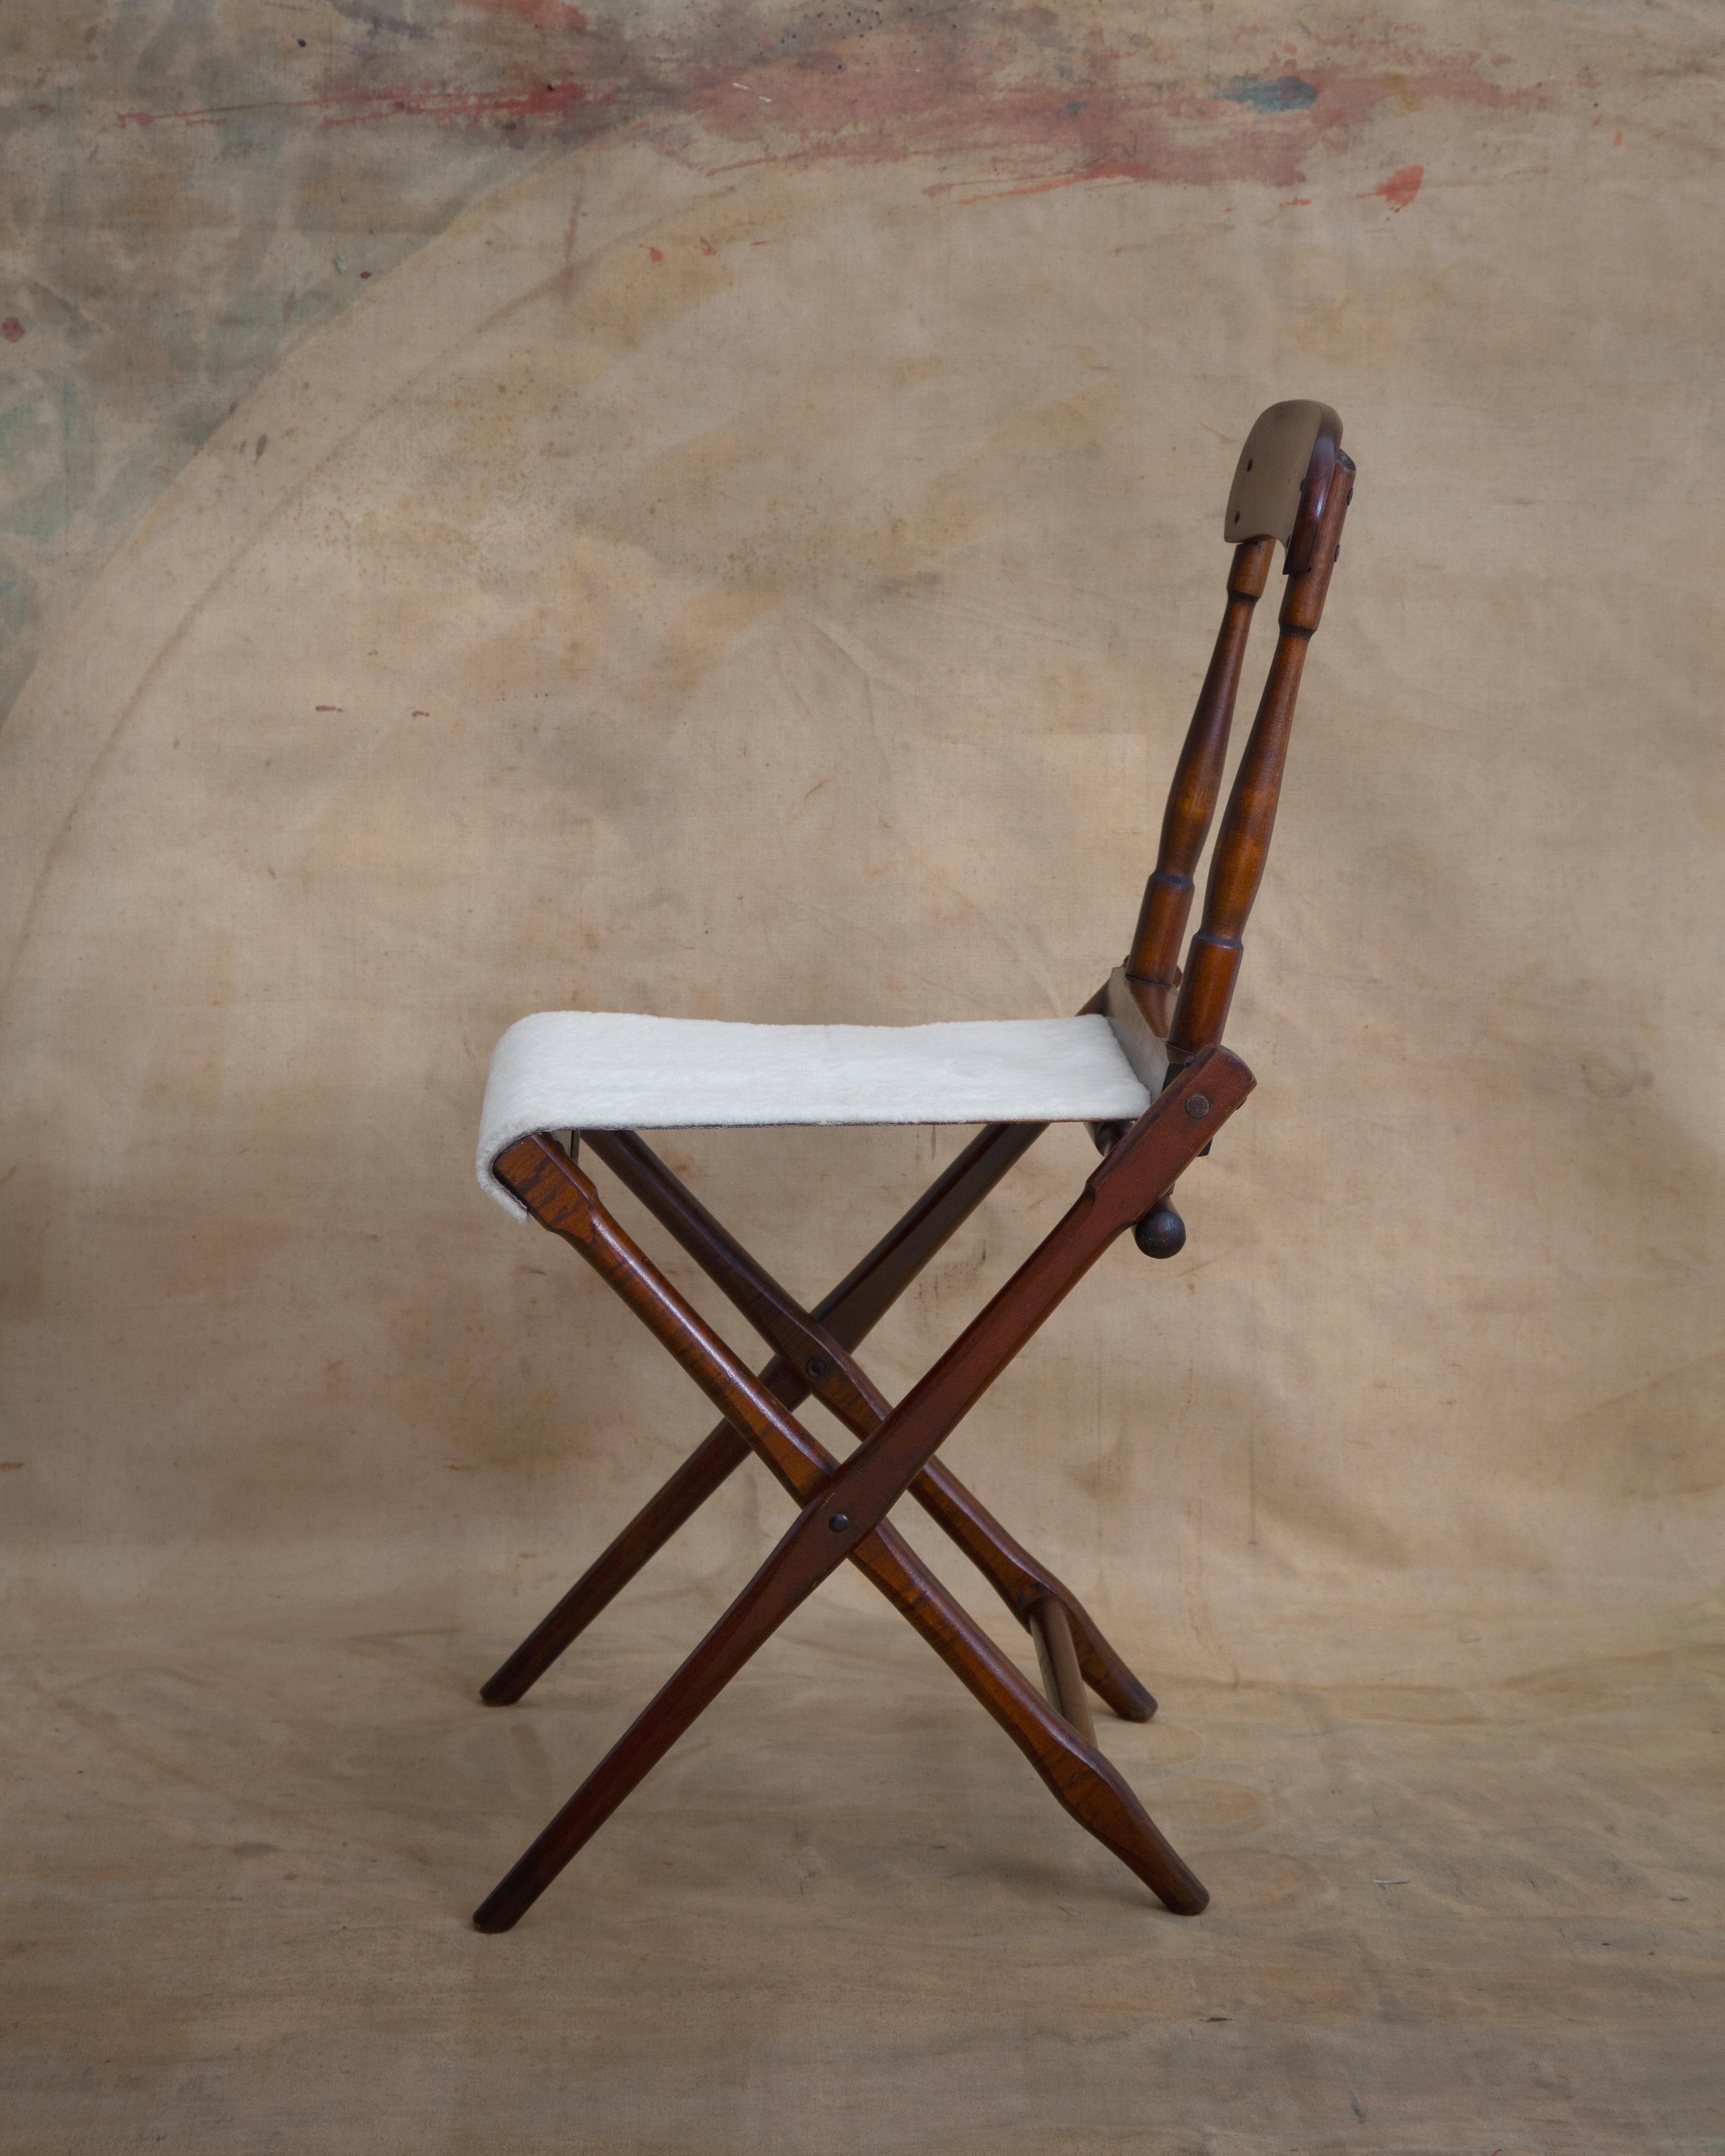 19th century wooden folding campaign chair. Simply but elegantly designed and upholstered in shearling.